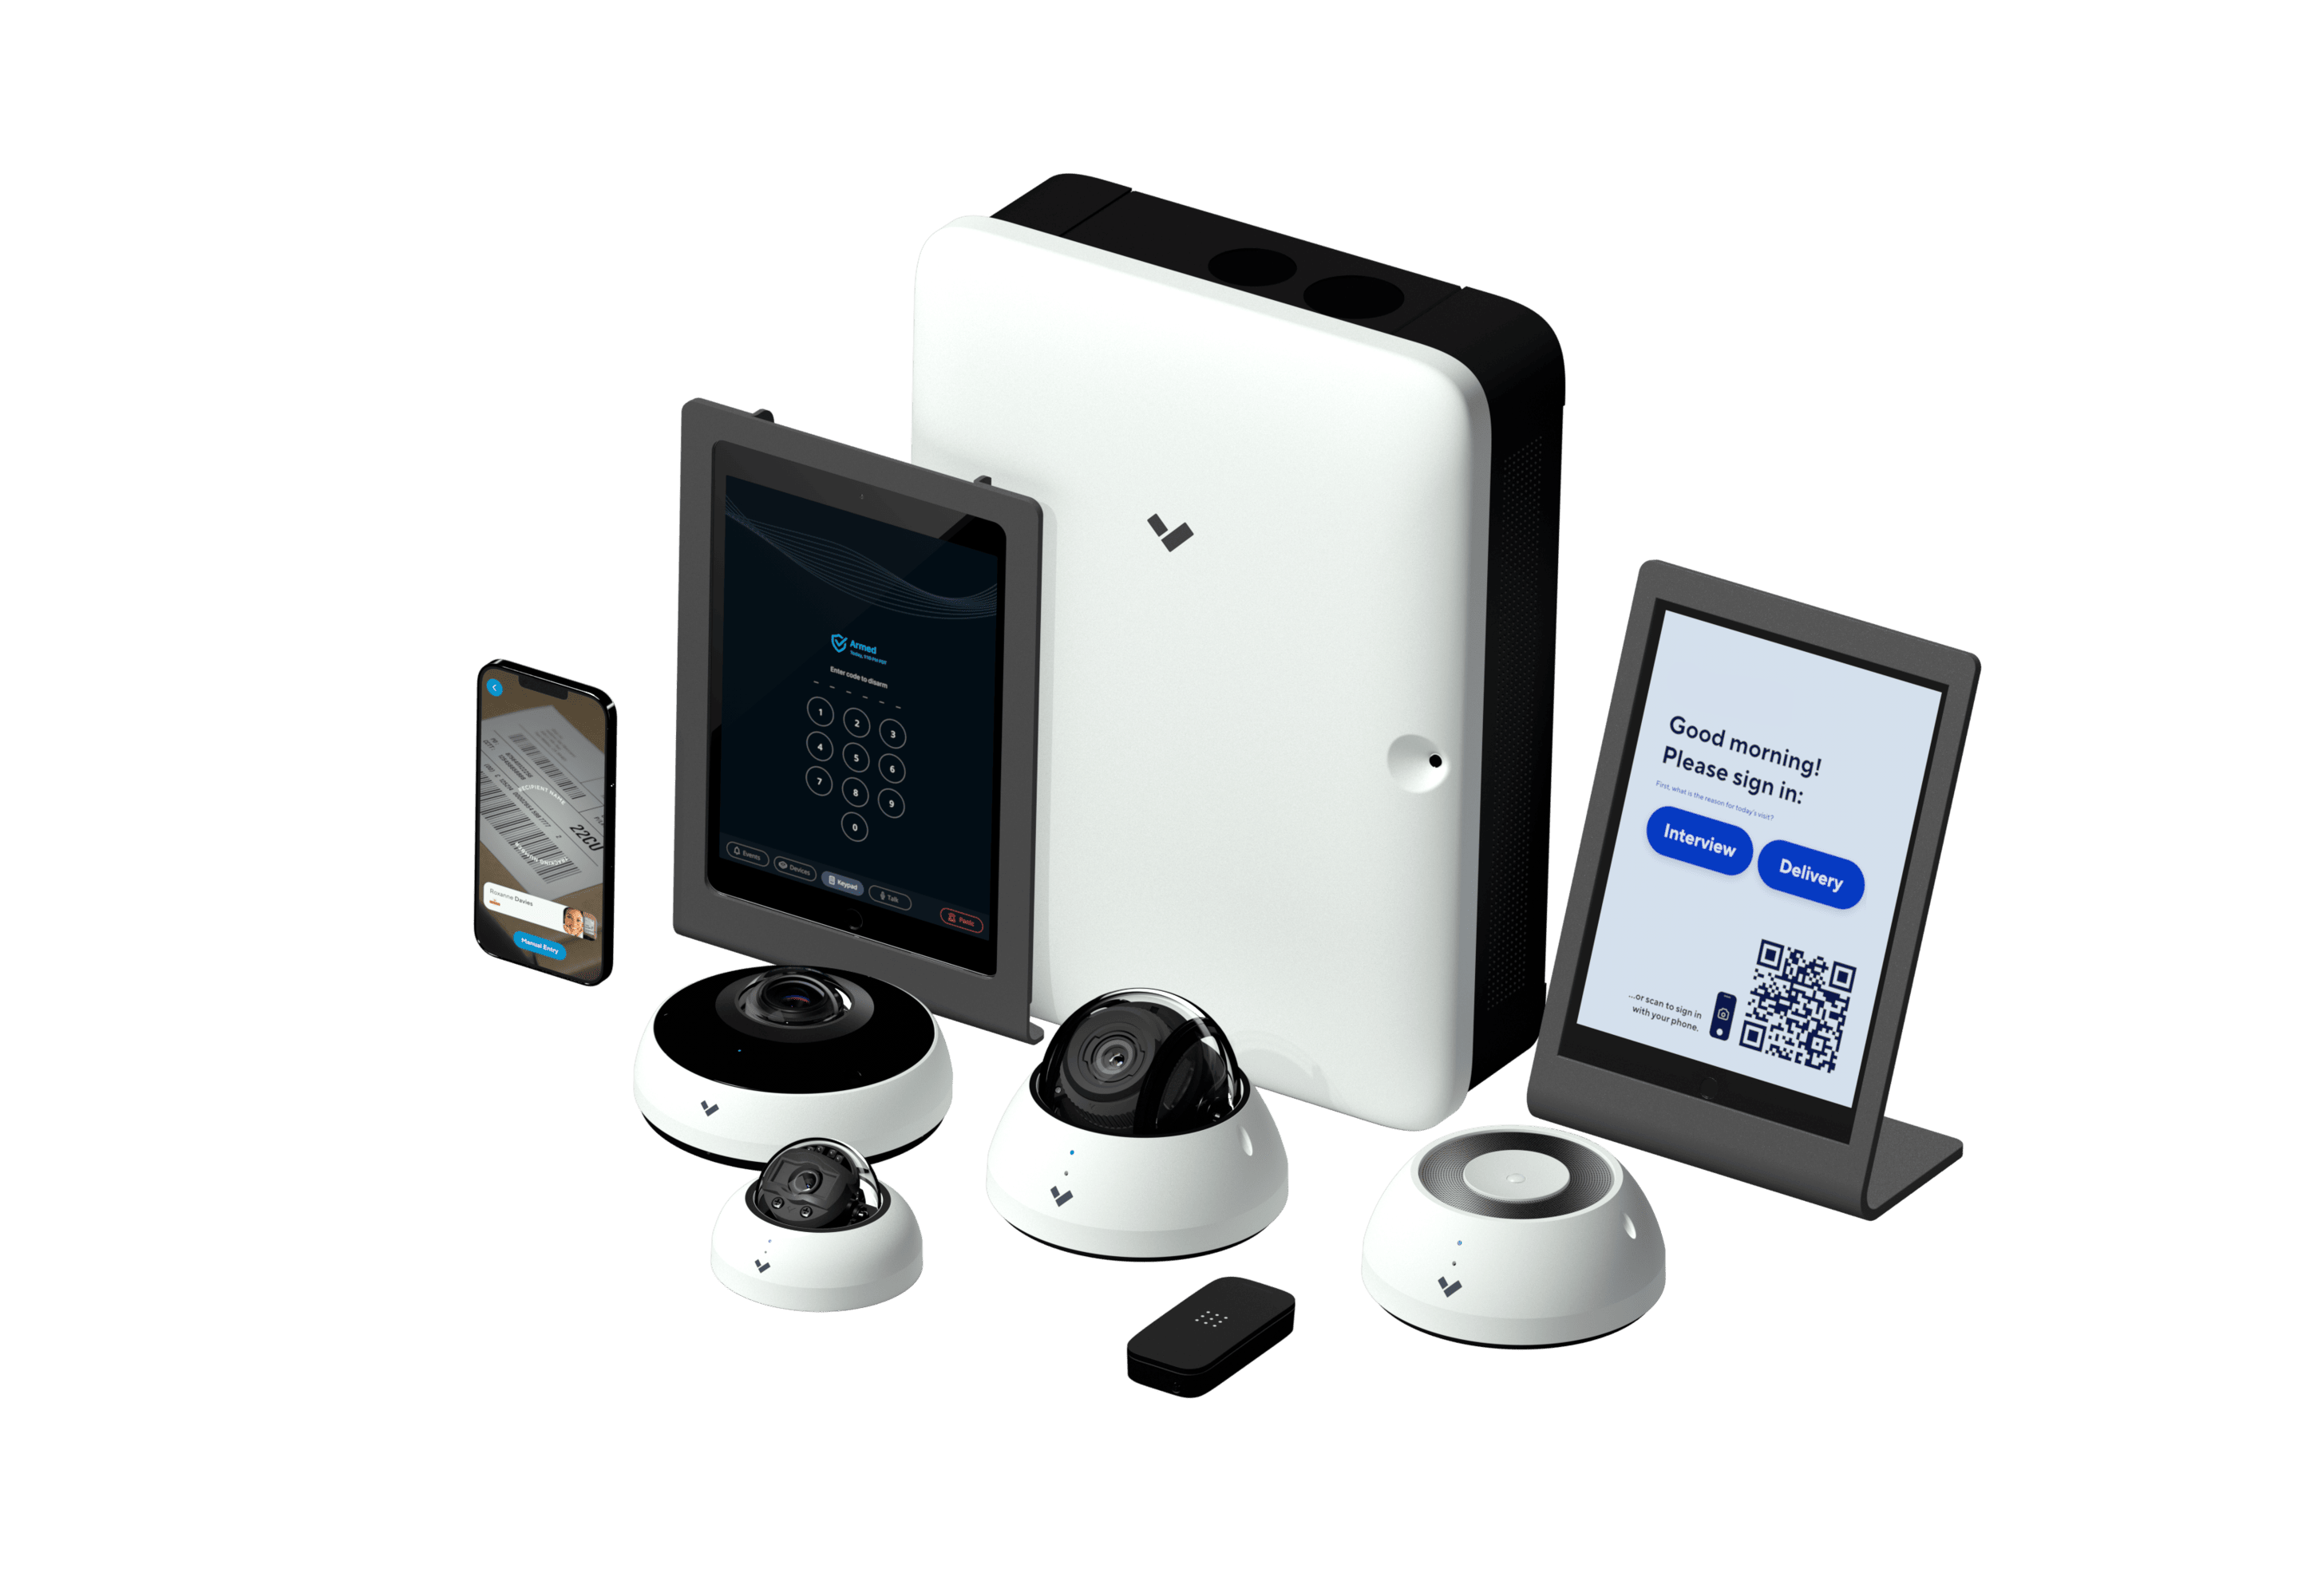 Verkada Device Family for organizations' vetted security solutions